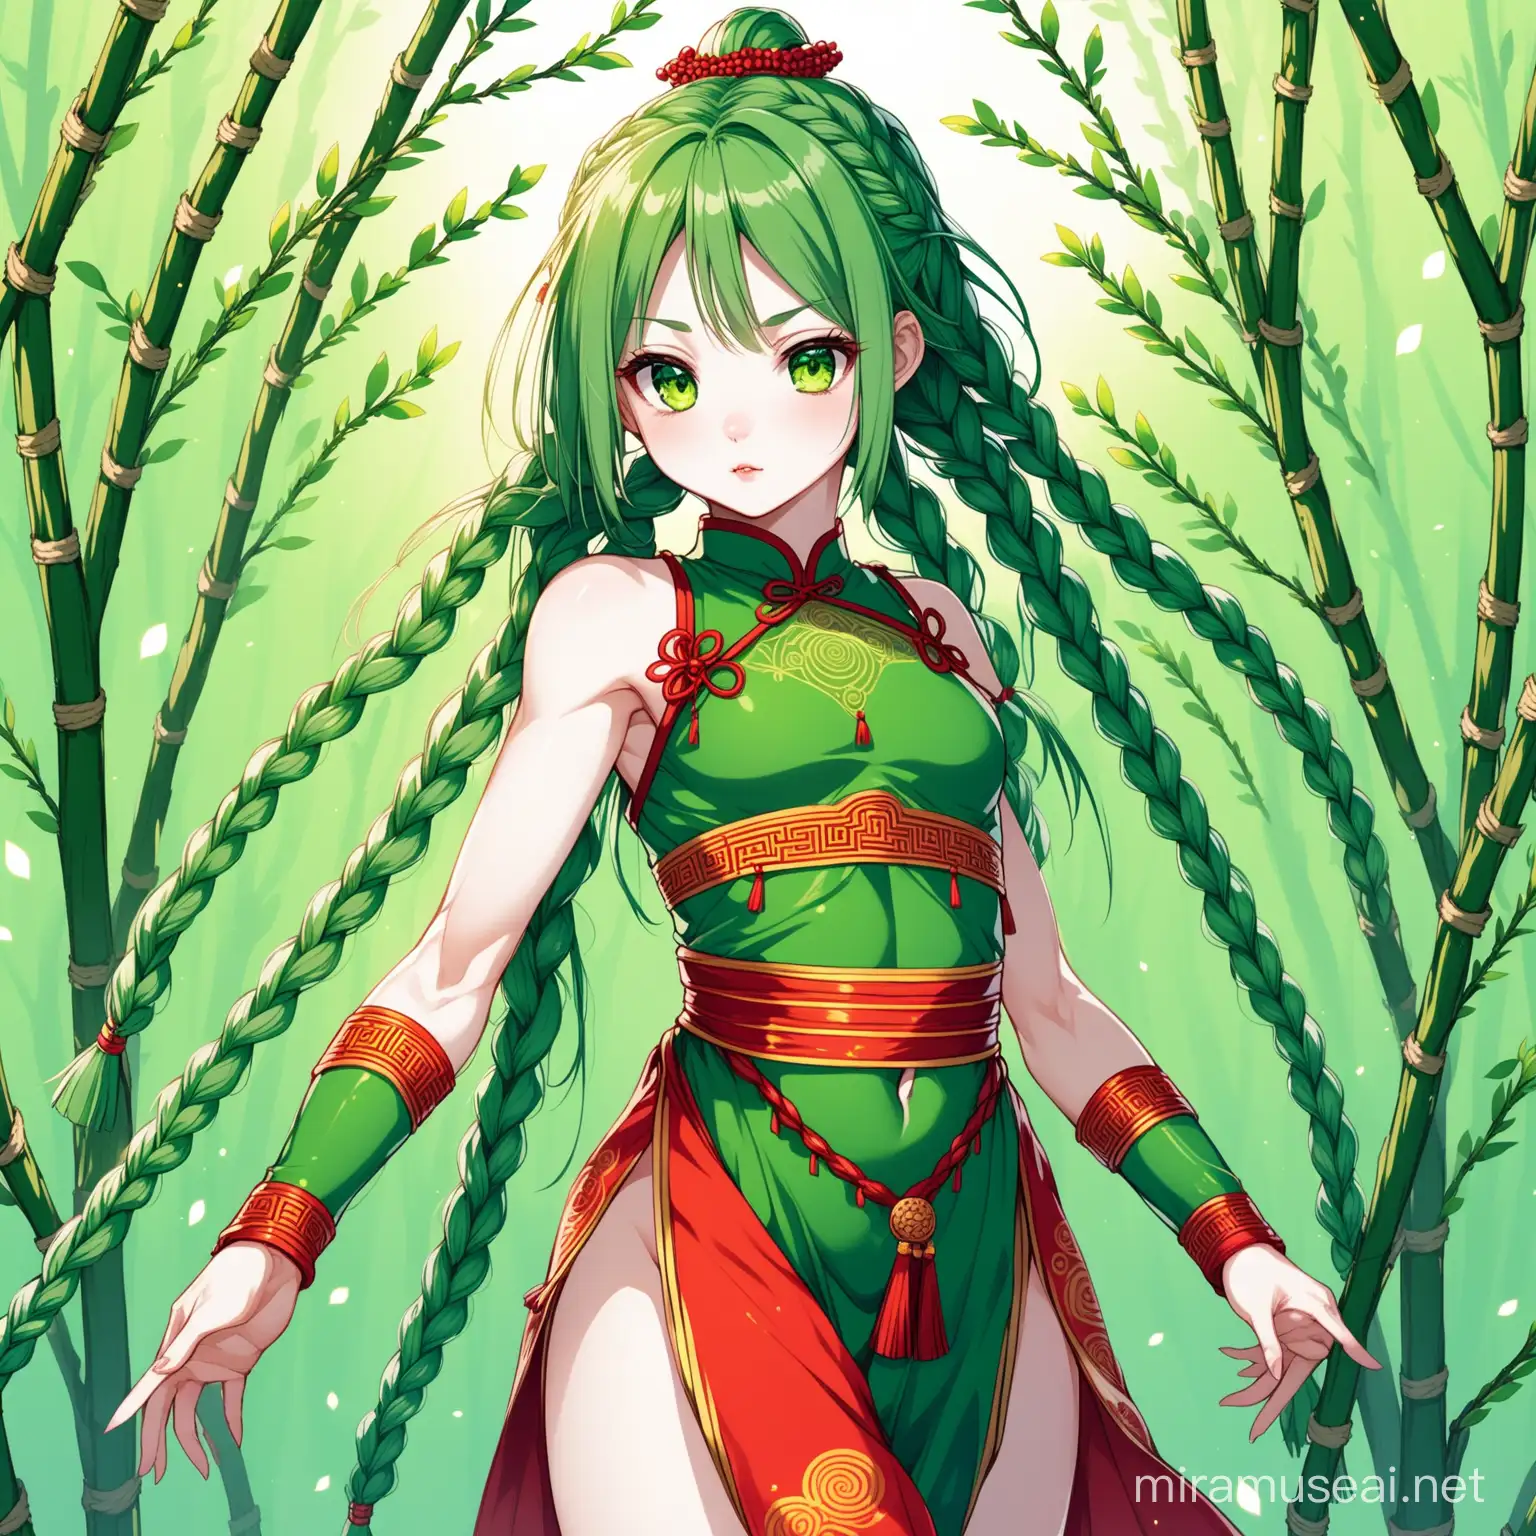 a young girl with pale skin, anime style, dressed like a chinese ritual dancer, cute, big dark green eyes, green hair braided into tens of small braids looking like willow branches, surprisingly muscular